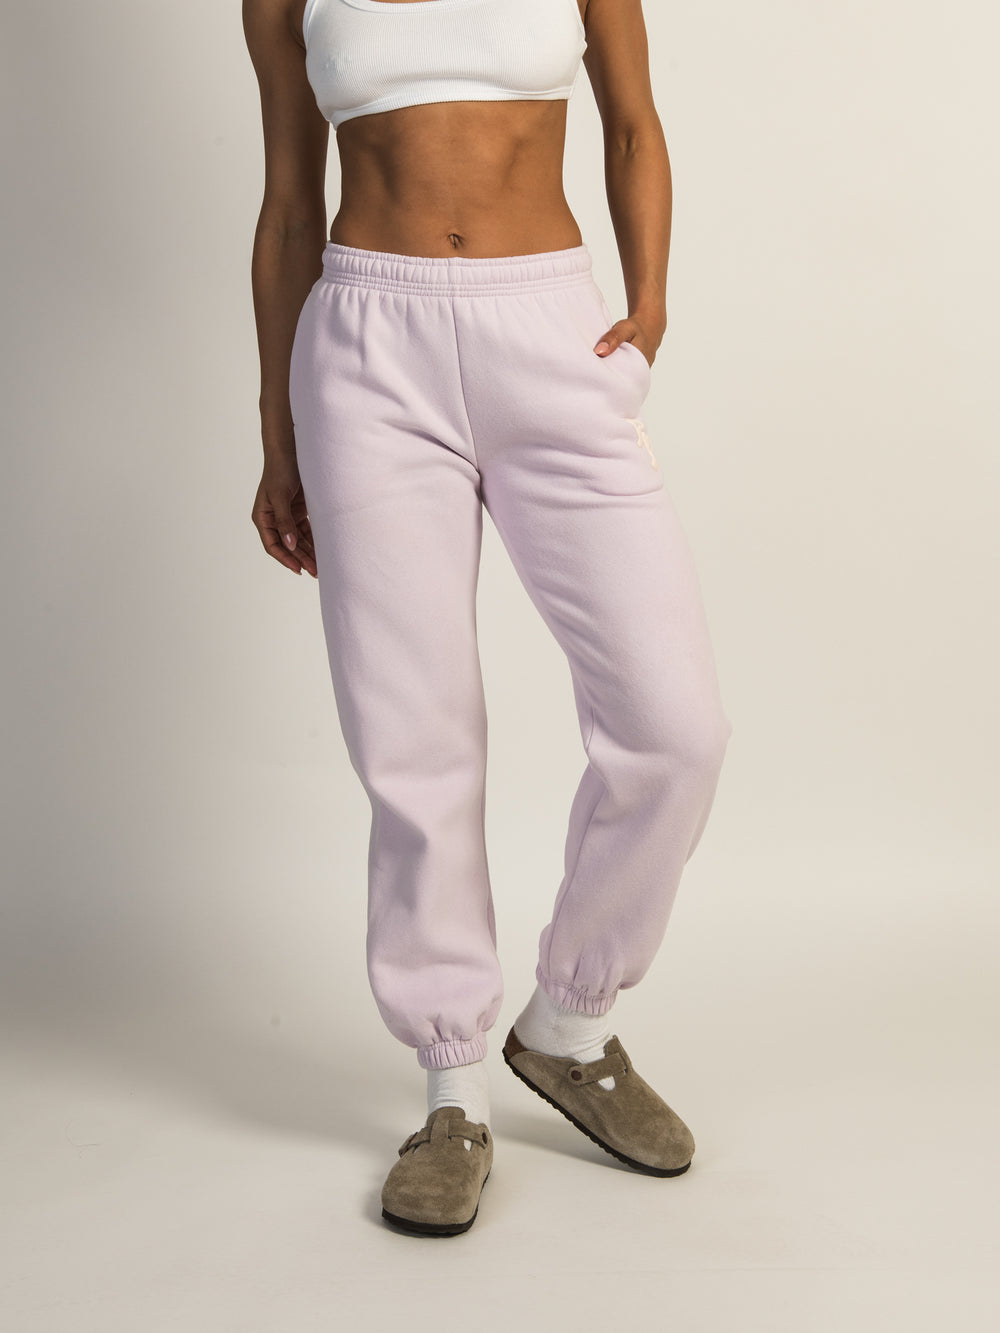 PRINCESS POLLY SQUIGGLE TRACK PANT